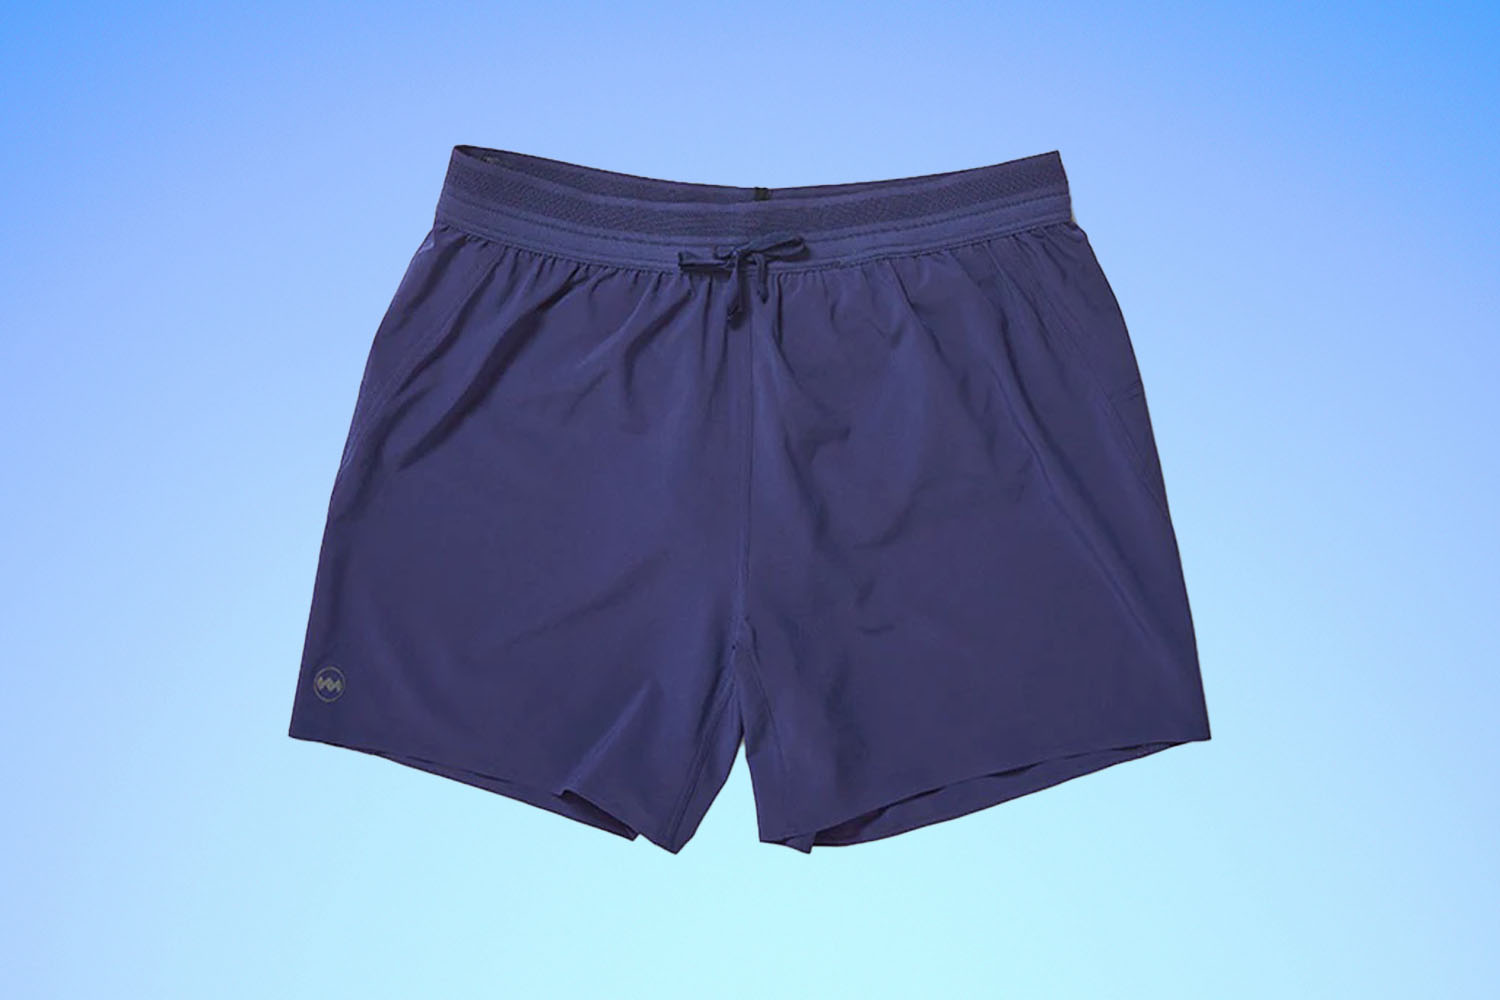 a pair of blue running shorts from Janji on a blue gradient background